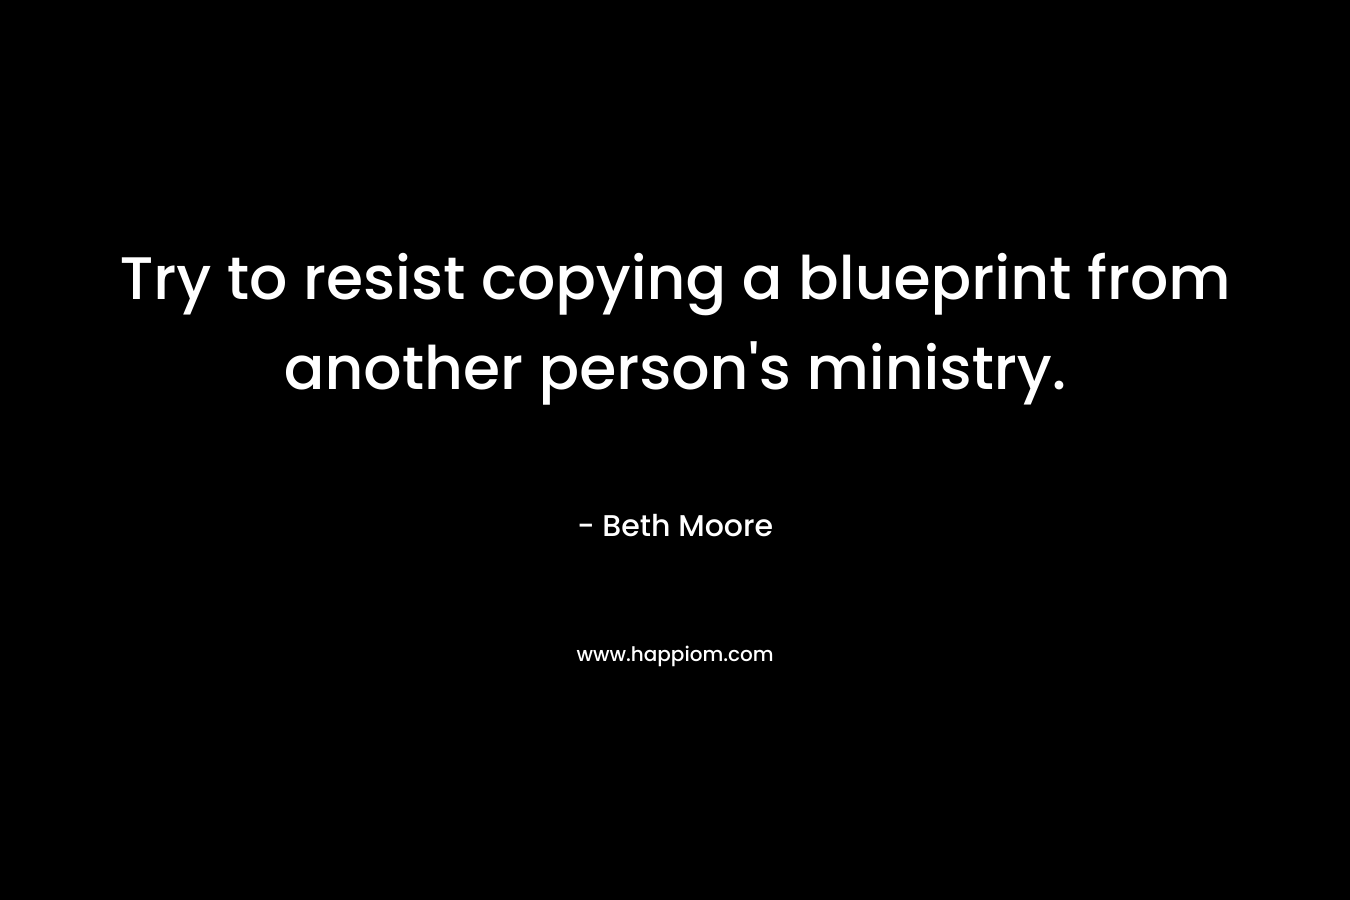 Try to resist copying a blueprint from another person’s ministry. – Beth Moore